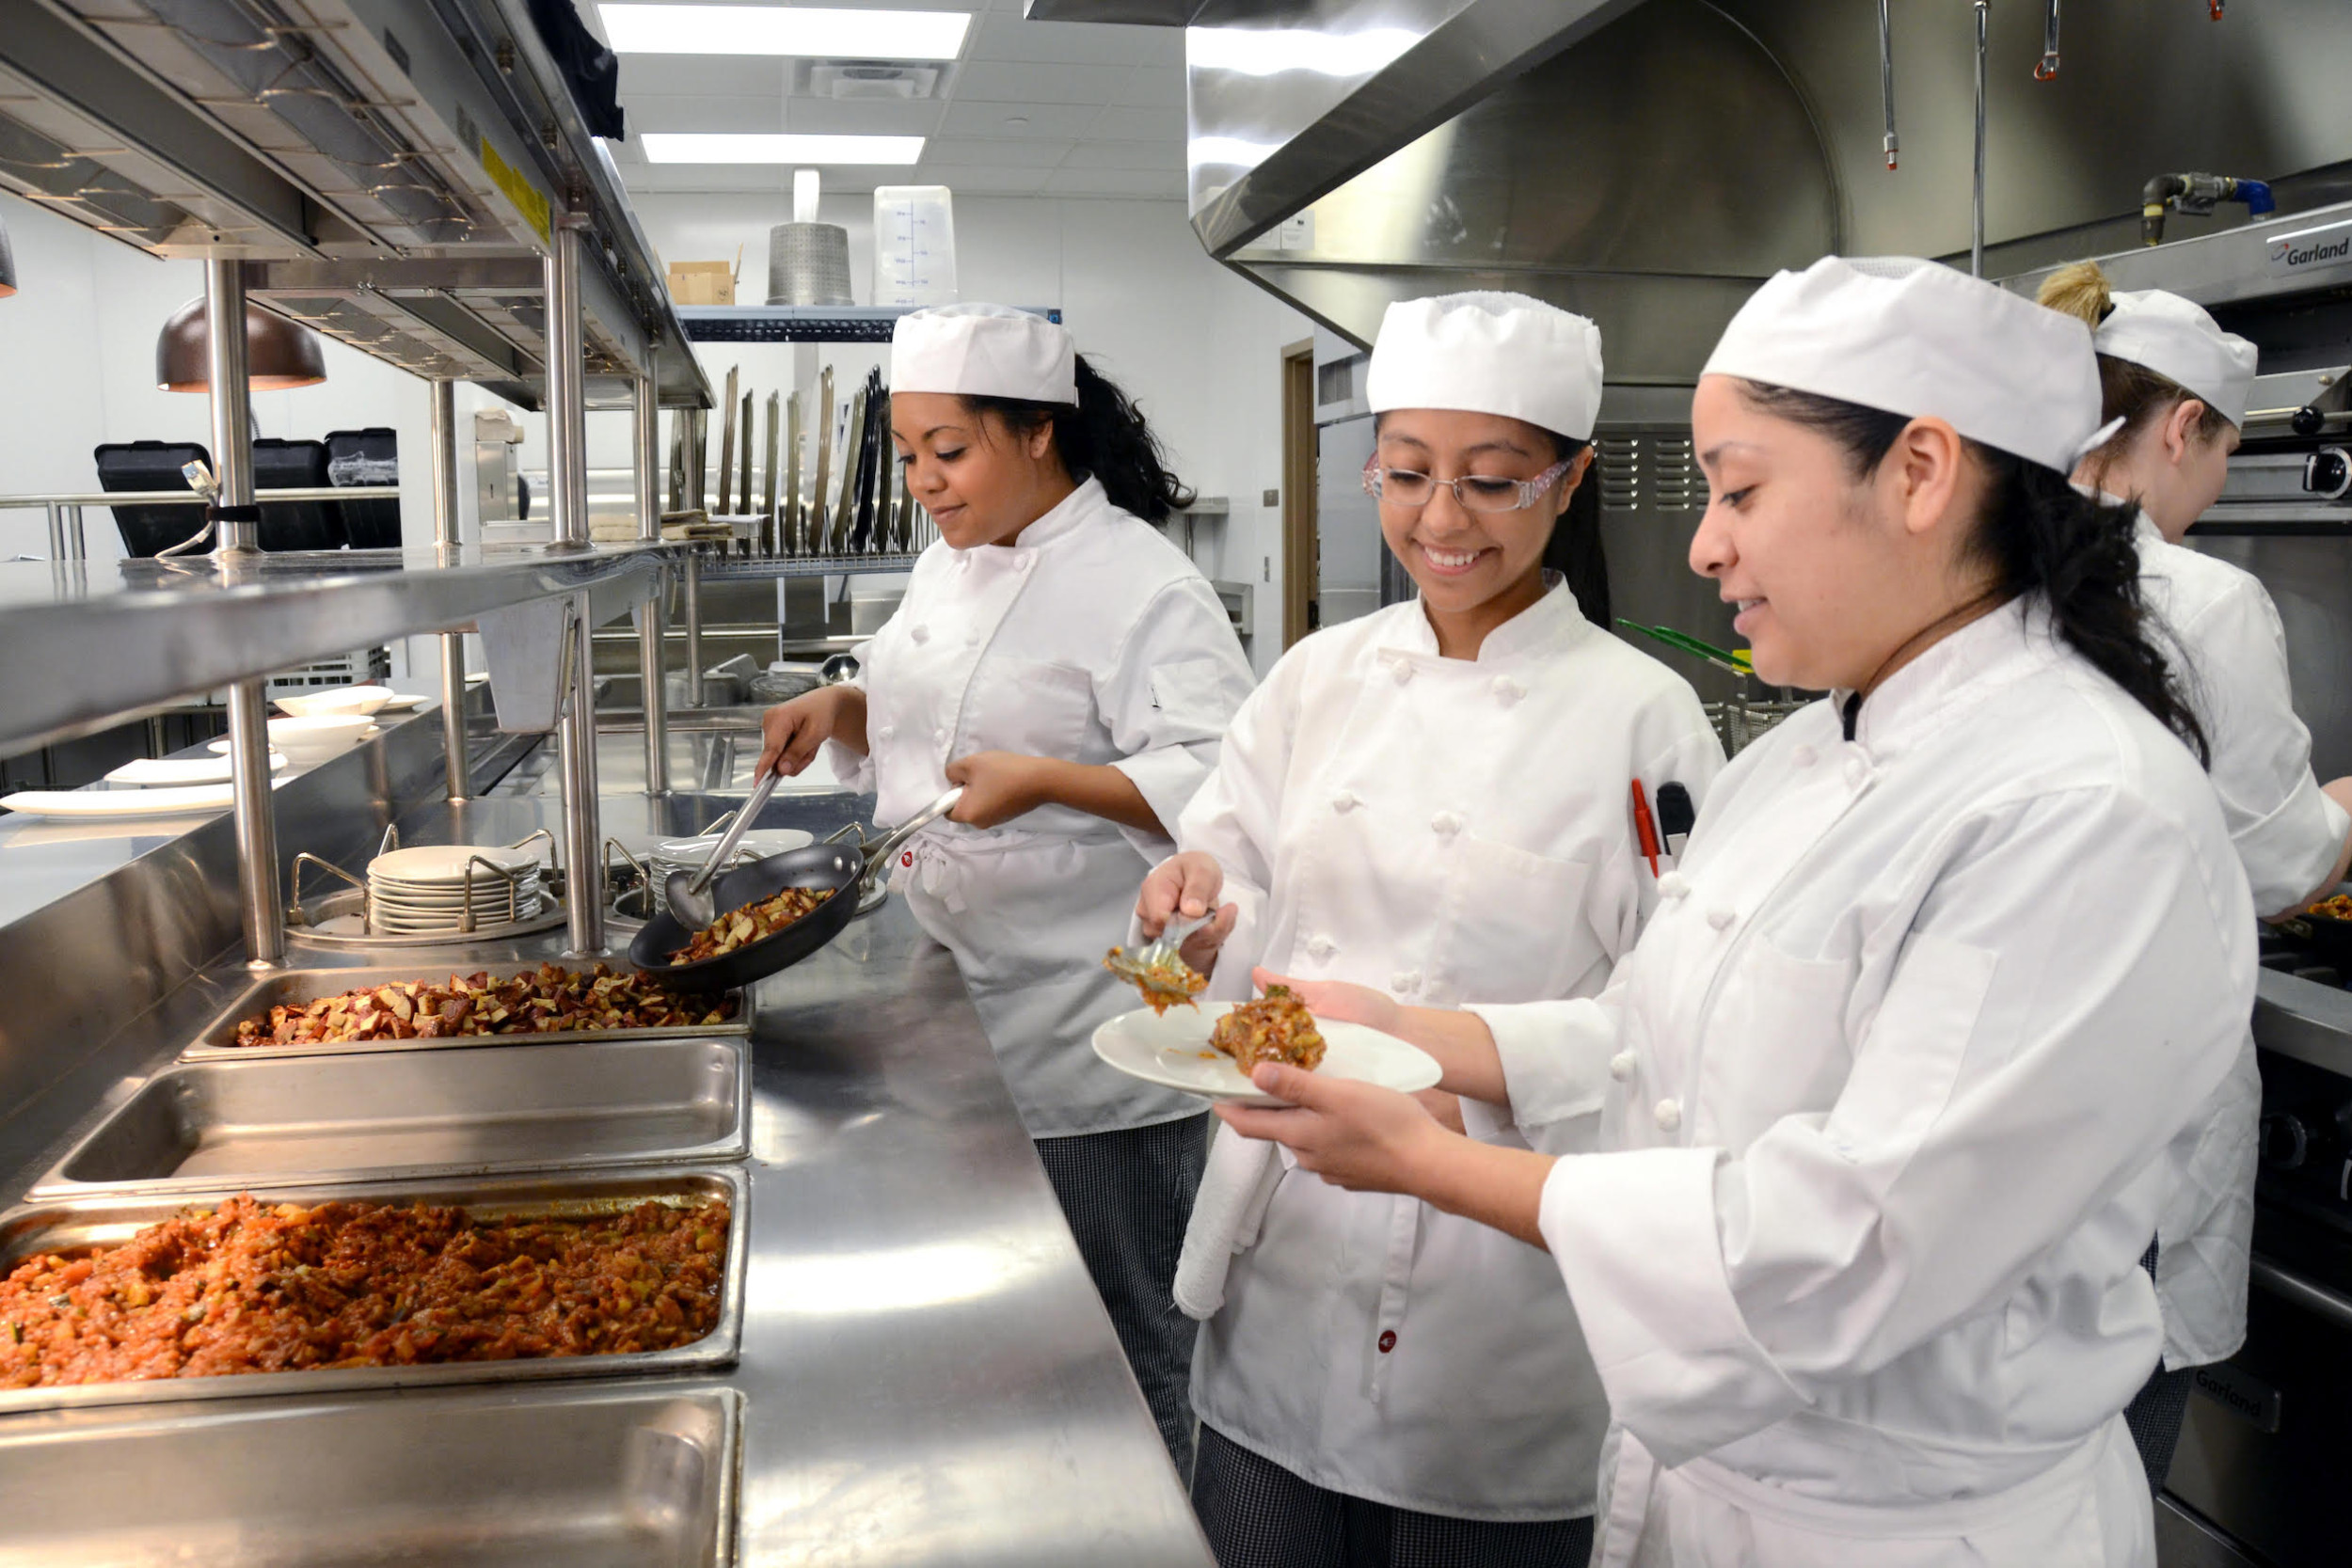 Ladies in a commercial kitchen cooking and preparing a plate